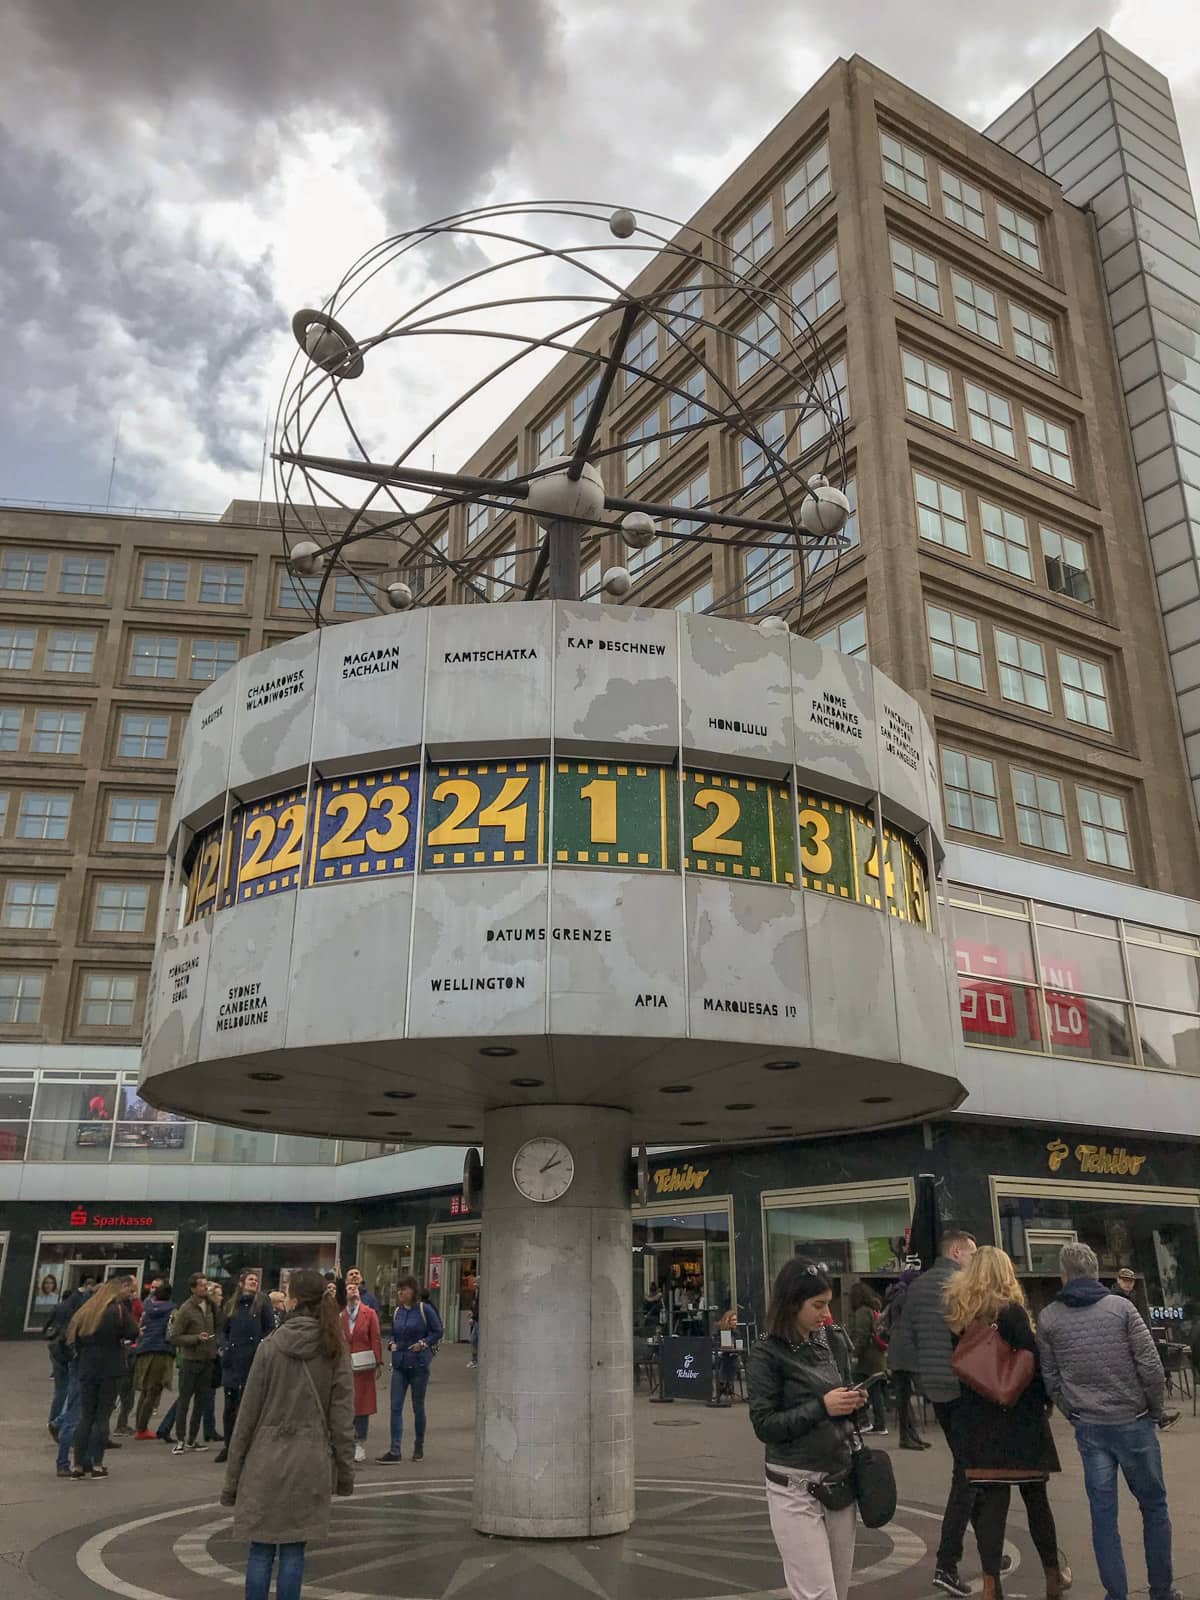 A monument in a turret shape, displaying various countries and numbers on a strip in the middle of the turret representing what hour of the day is being observed in each city.